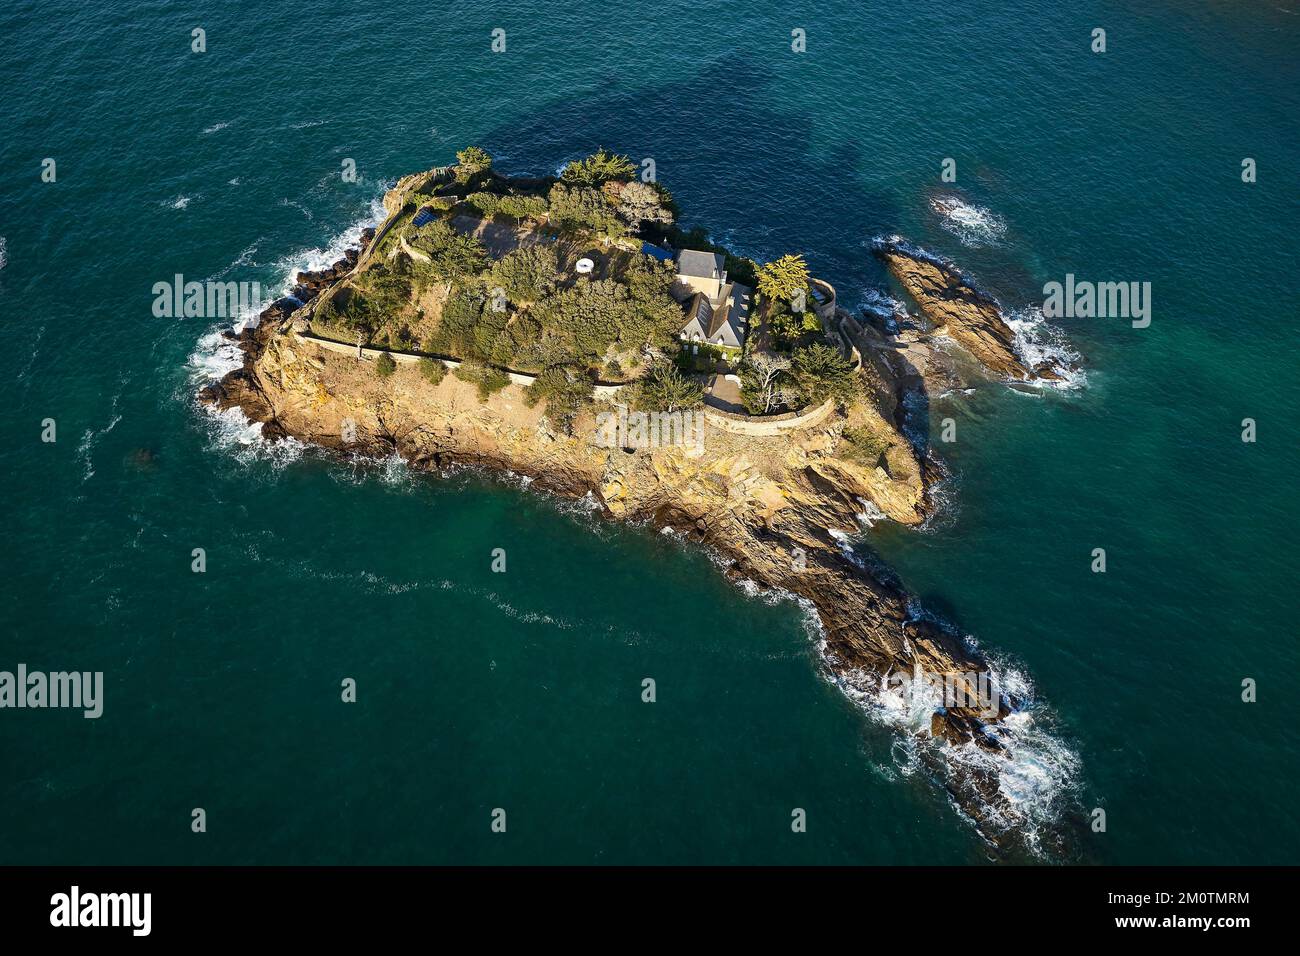 France, Ille-et-Vilaine (35), C?te d'Emeraude, surroundings of Cancale, Saint-Coulomb, Anse du Guesclin and Fort du Guesclin built on an islet, Guesclin island where L?o Ferr? resided (aerial view) Stock Photo